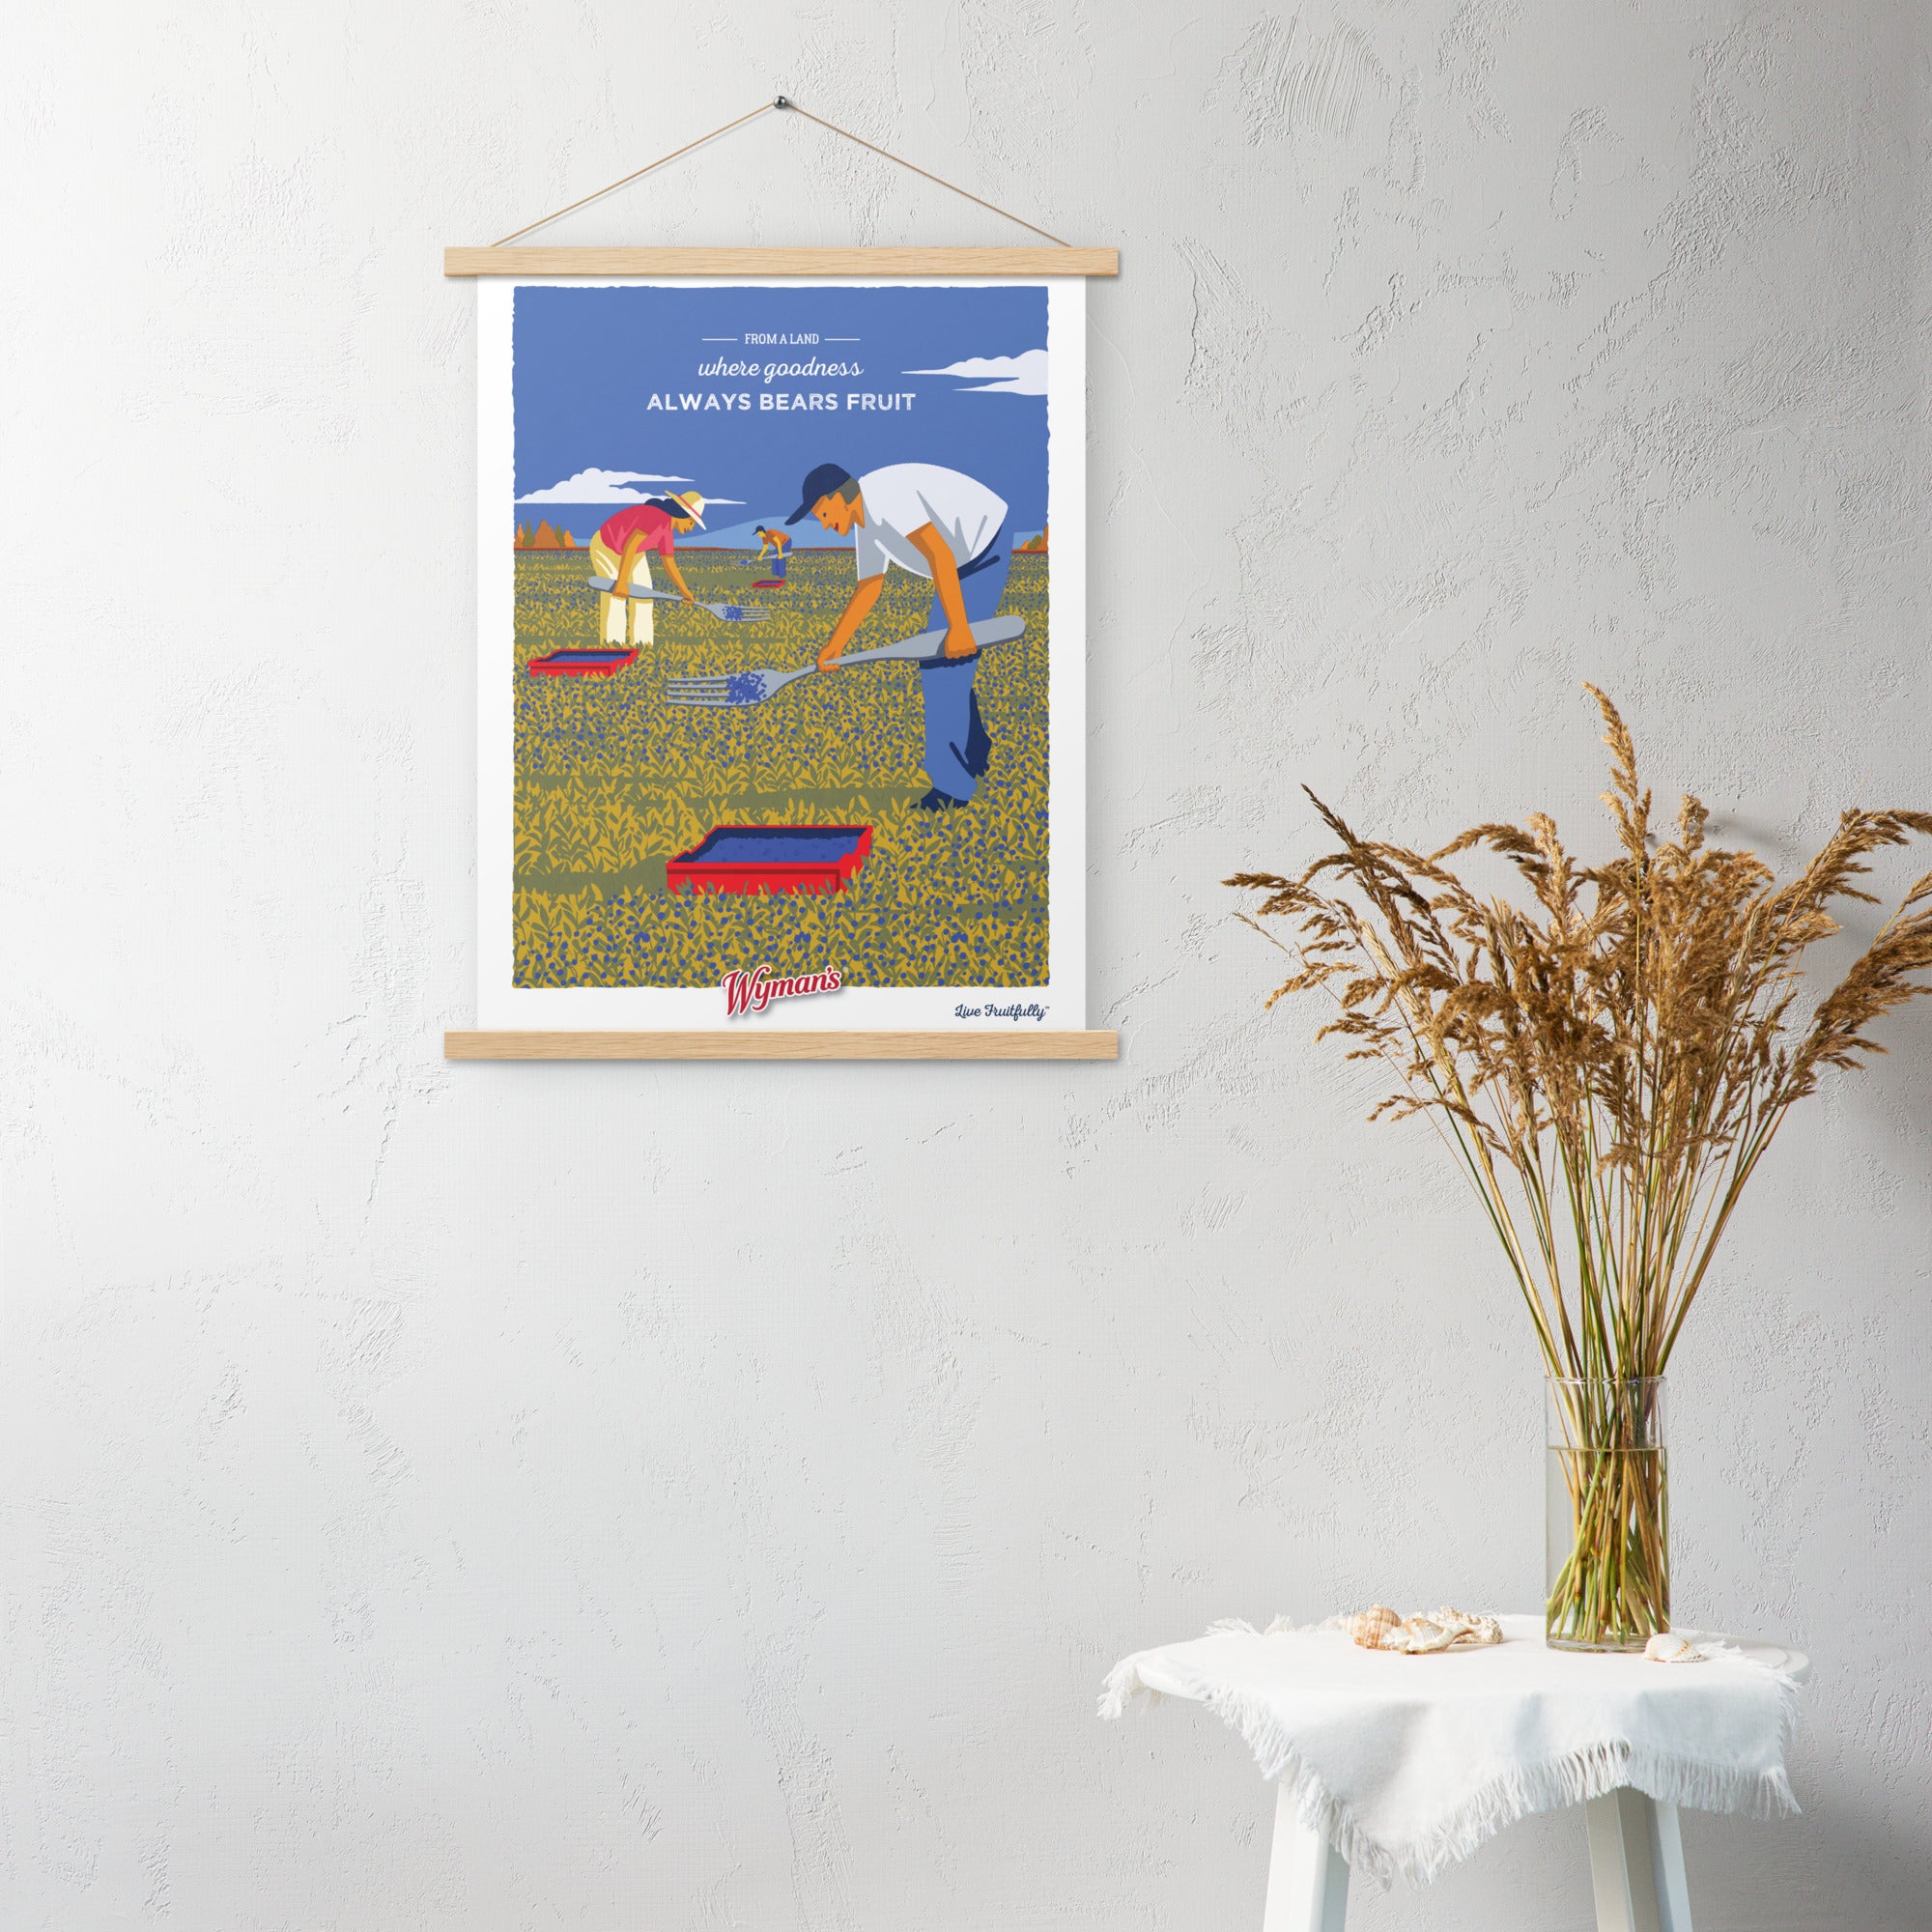 A Shop Wyman's poster with an image of a man in a field of blueberries.